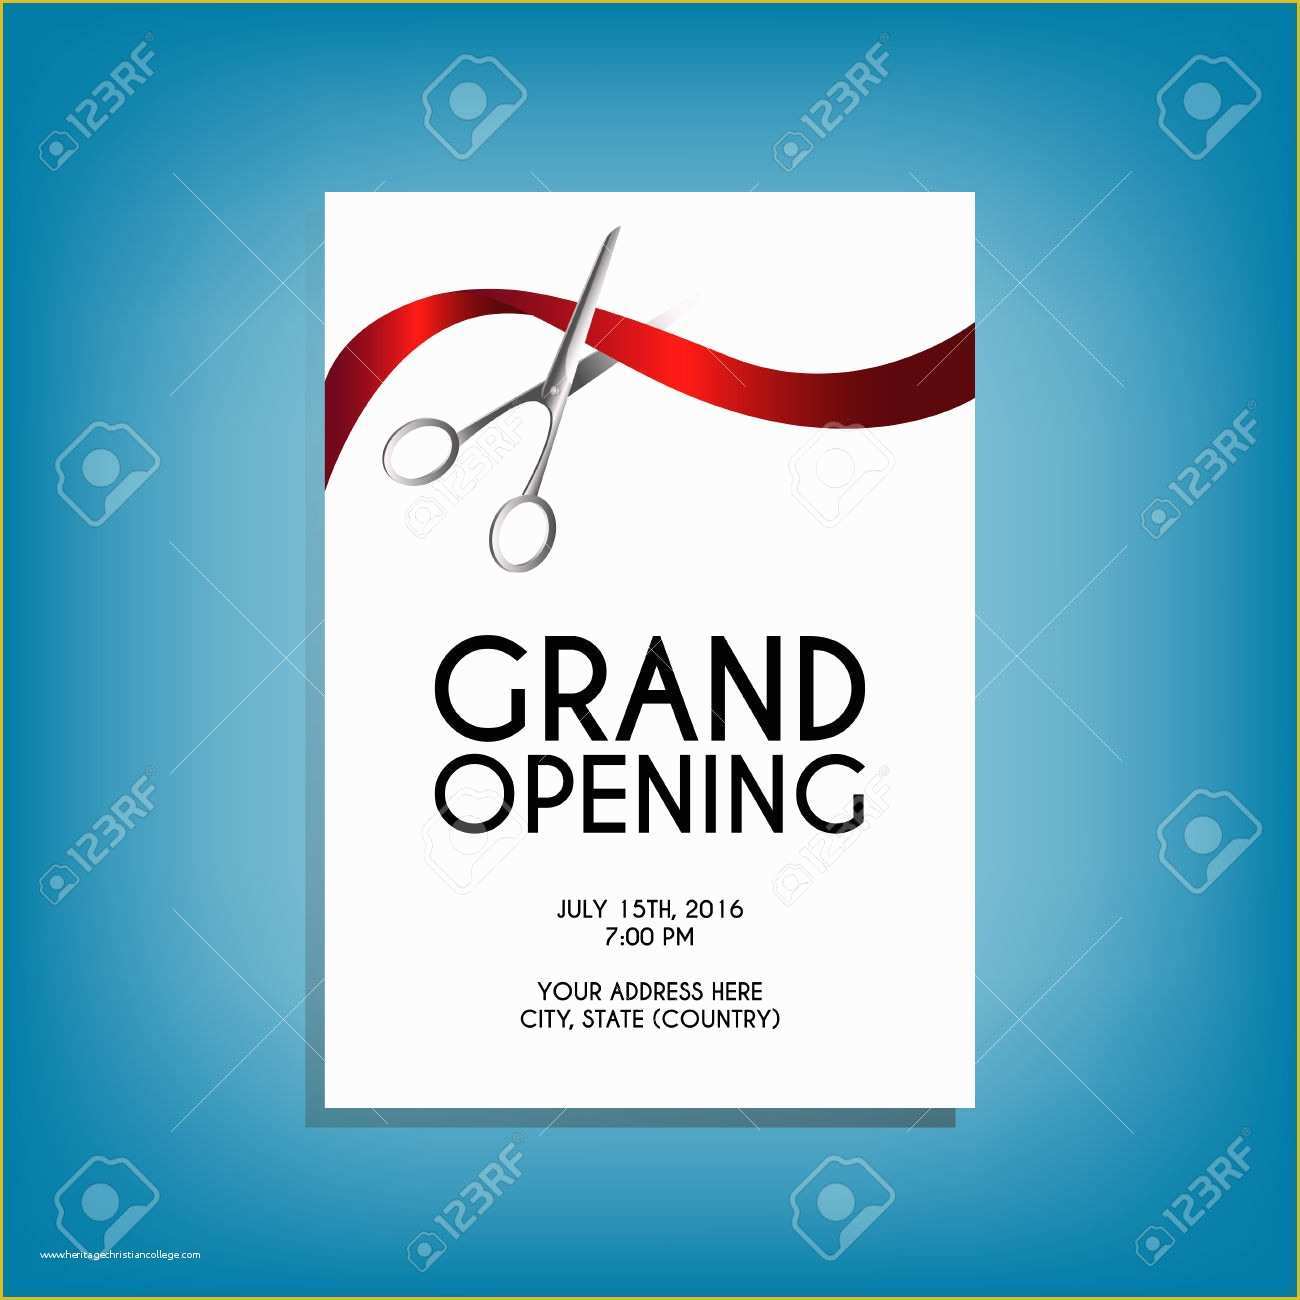 Grand Opening Flyer Template Free Of Grand Opening Invitation Templates